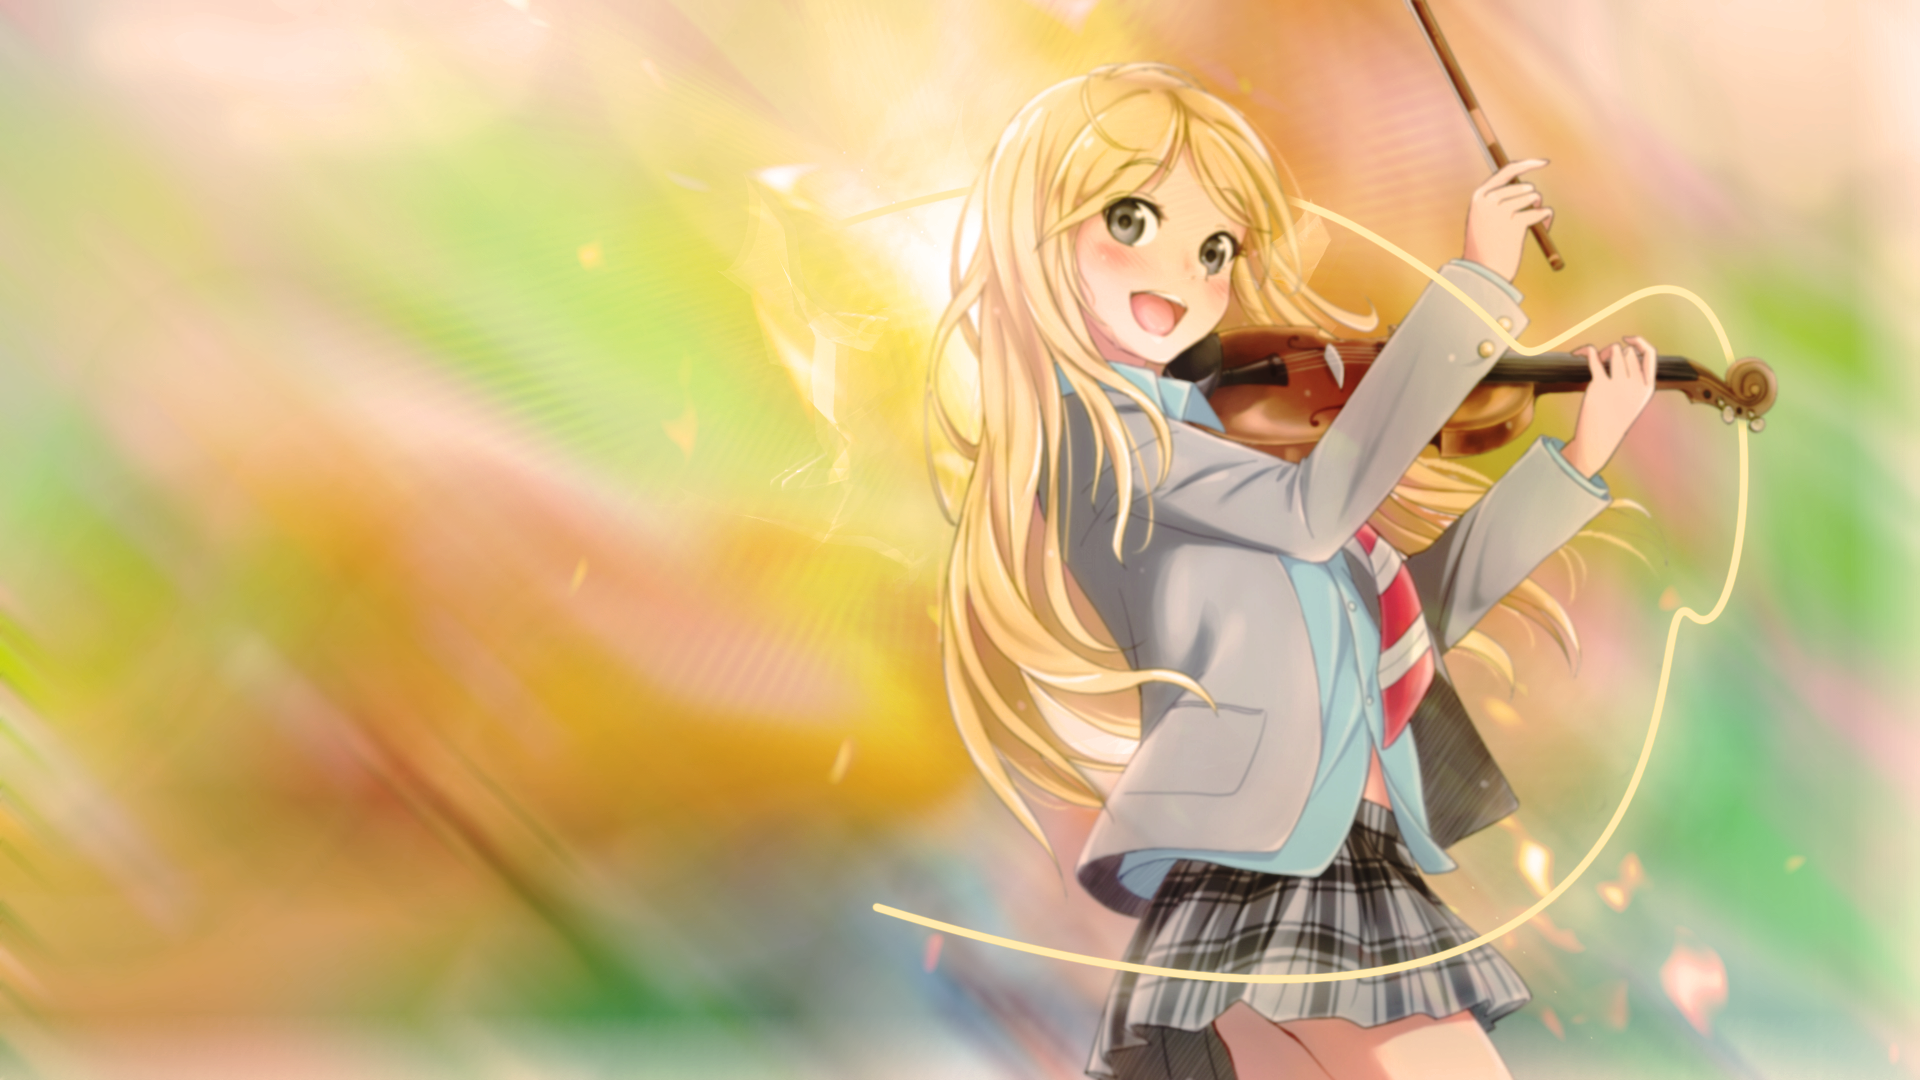 View, Download, Rate, and Comment on this Your Lie in April Art.